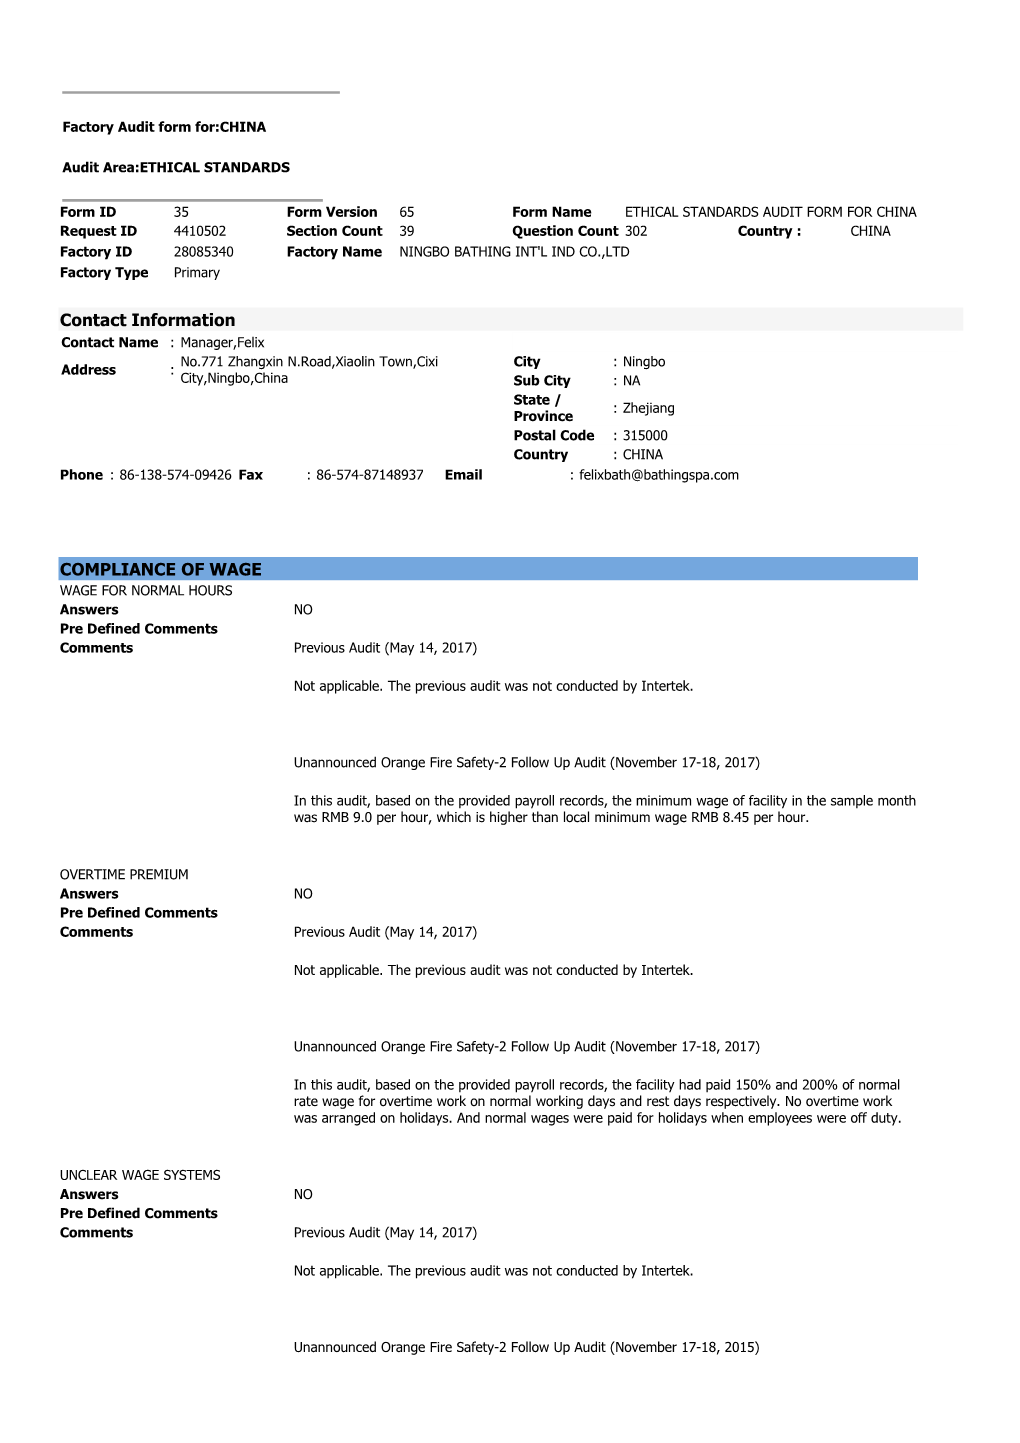 Factory Audit Form For:CHINA